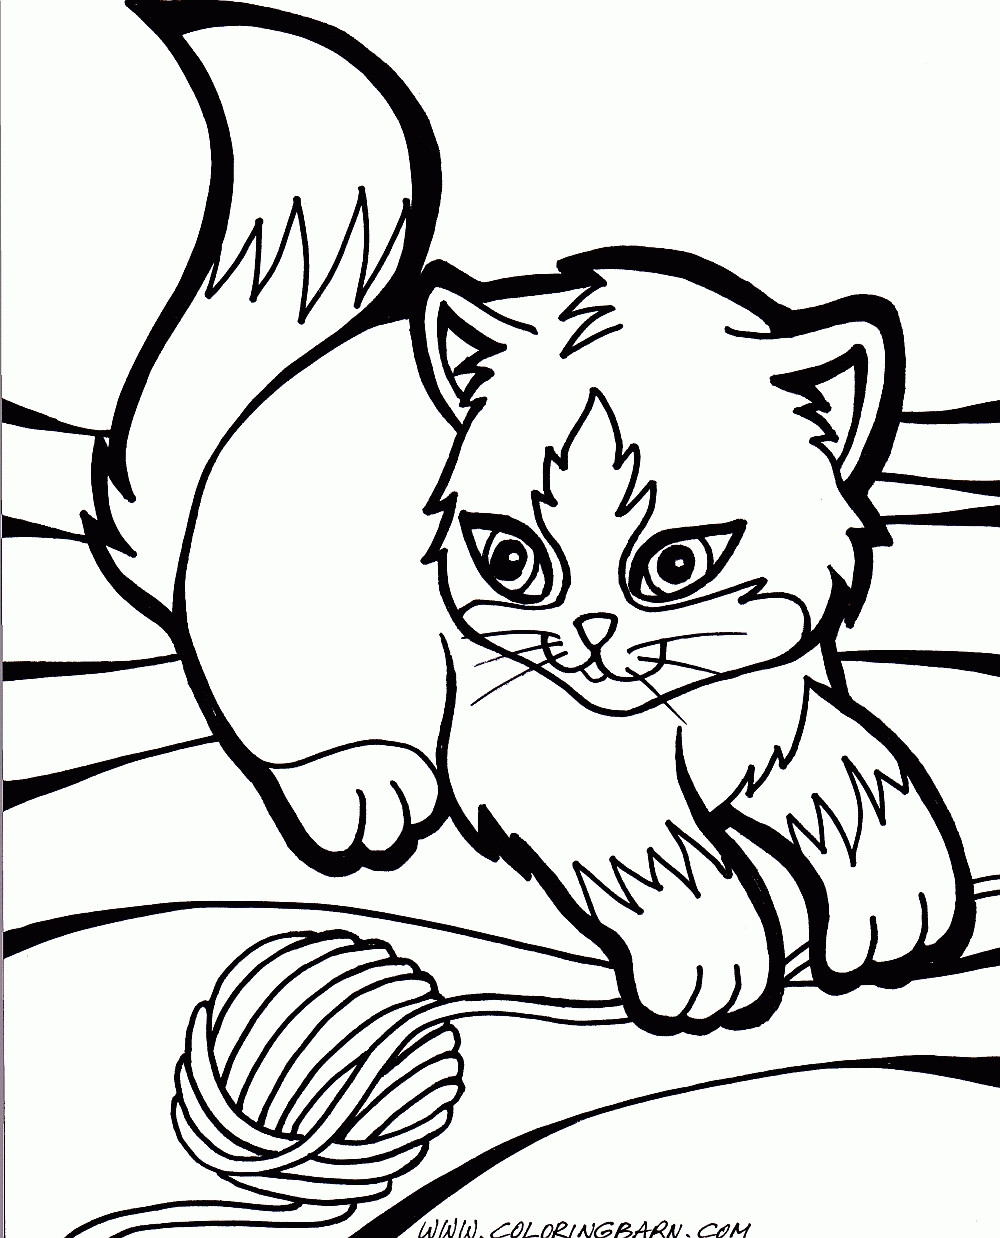 Best ideas about Coloring Pages For Boys That You Can Print
. Save or Pin 32 Awesome Free Coloring Pages for Boys Gianfreda Now.